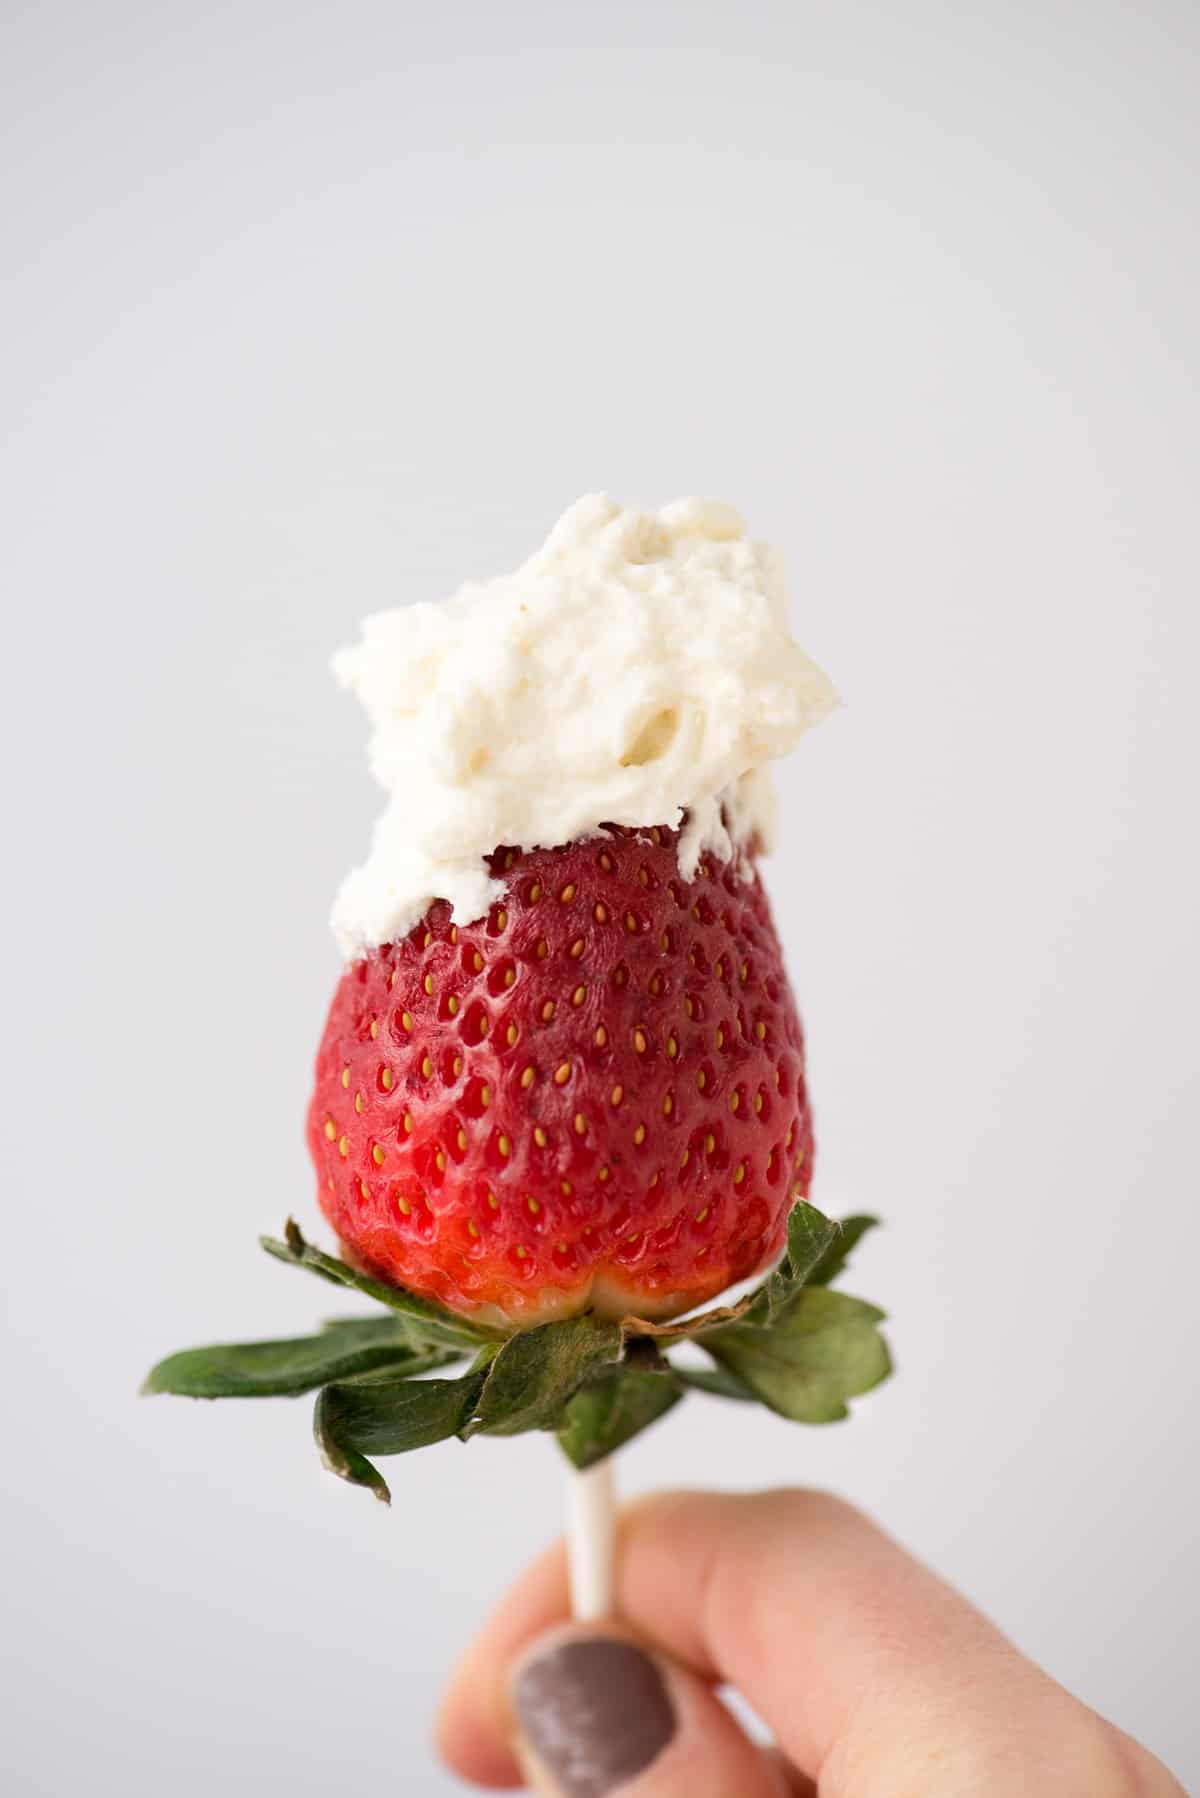 cheesecake whipped cream on top of strawberry